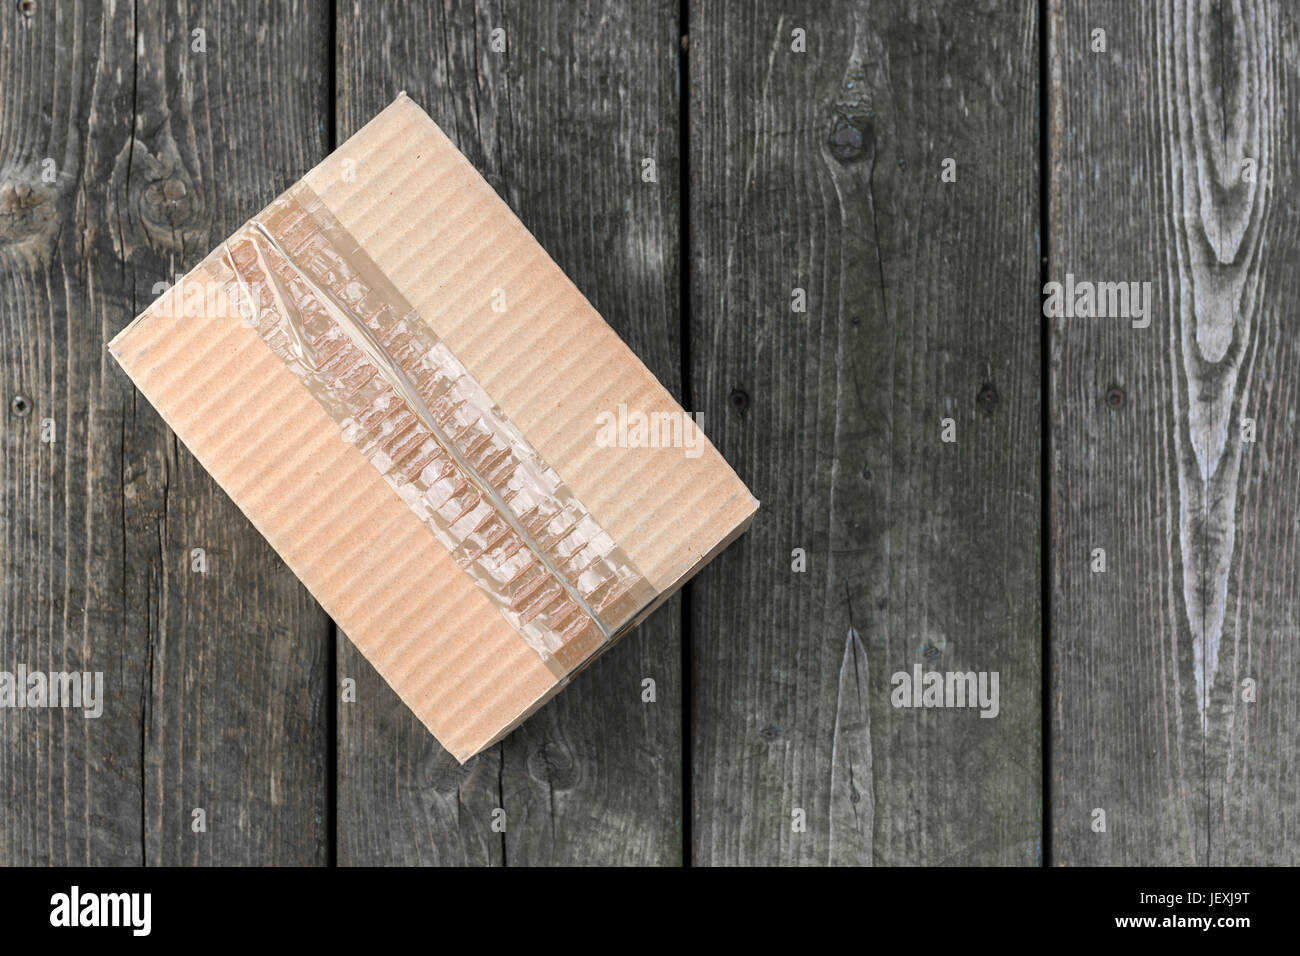 Cardboard delivery parcel box delivered to doorstep on old wood background, from above with copy space Stock Photo